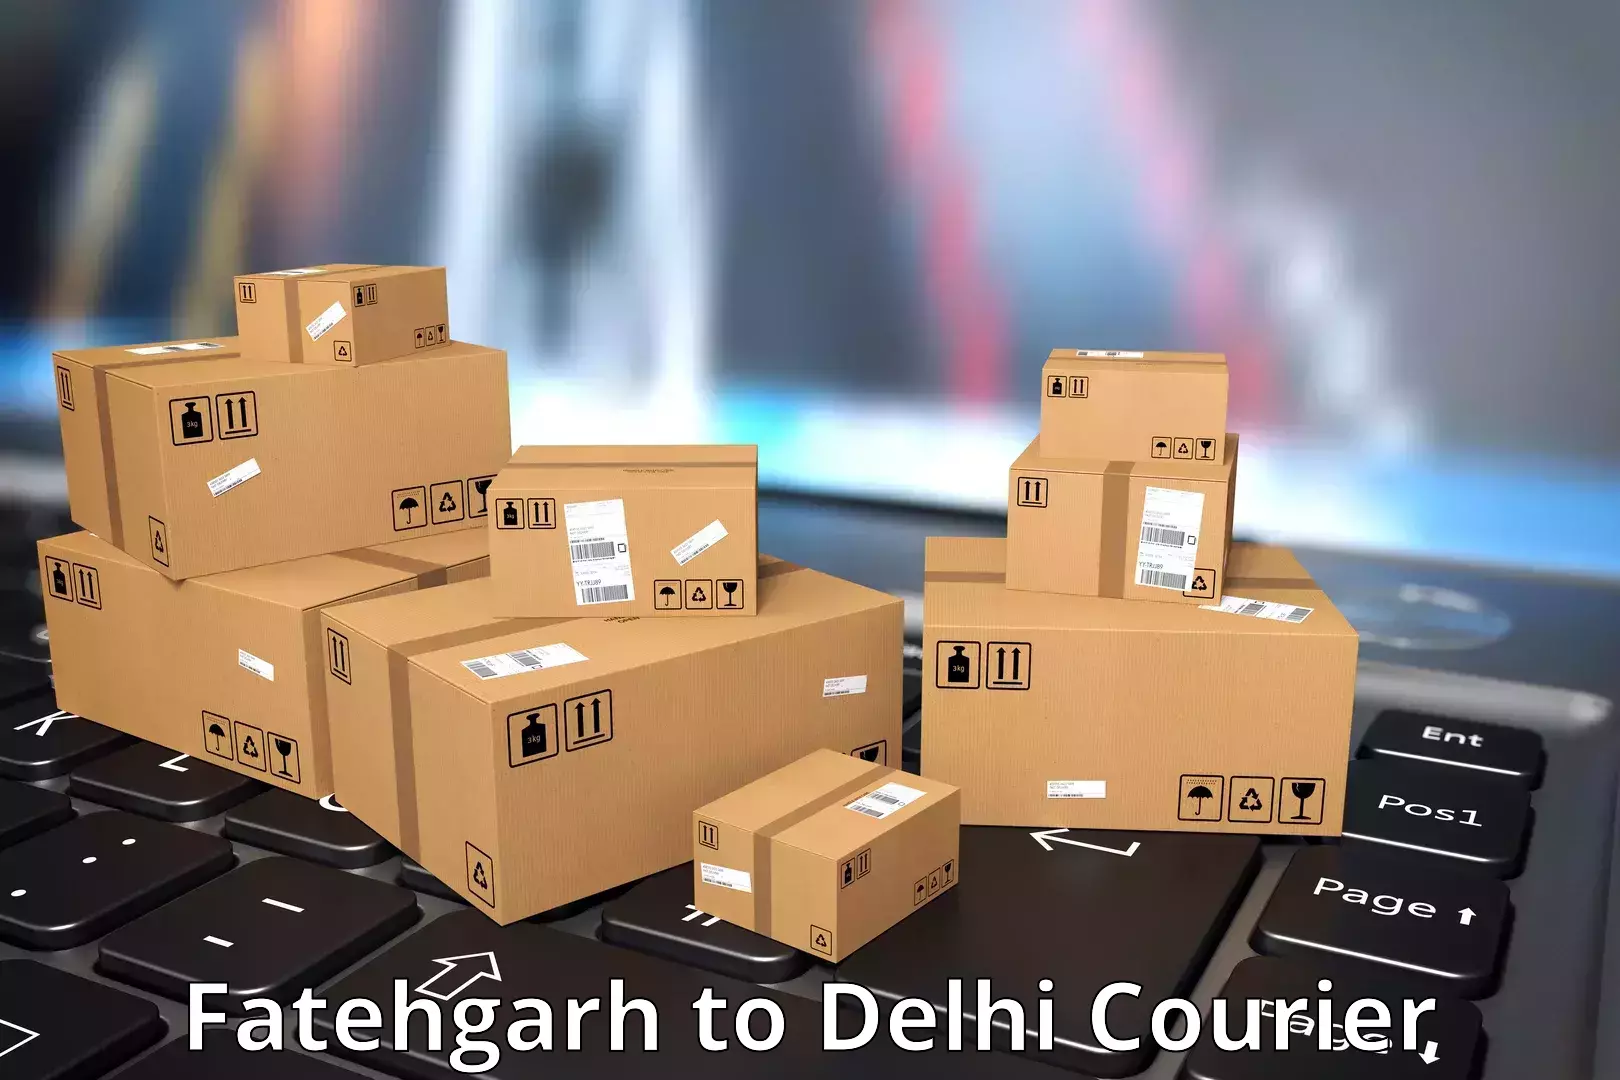 Advanced courier platforms Fatehgarh to NCR